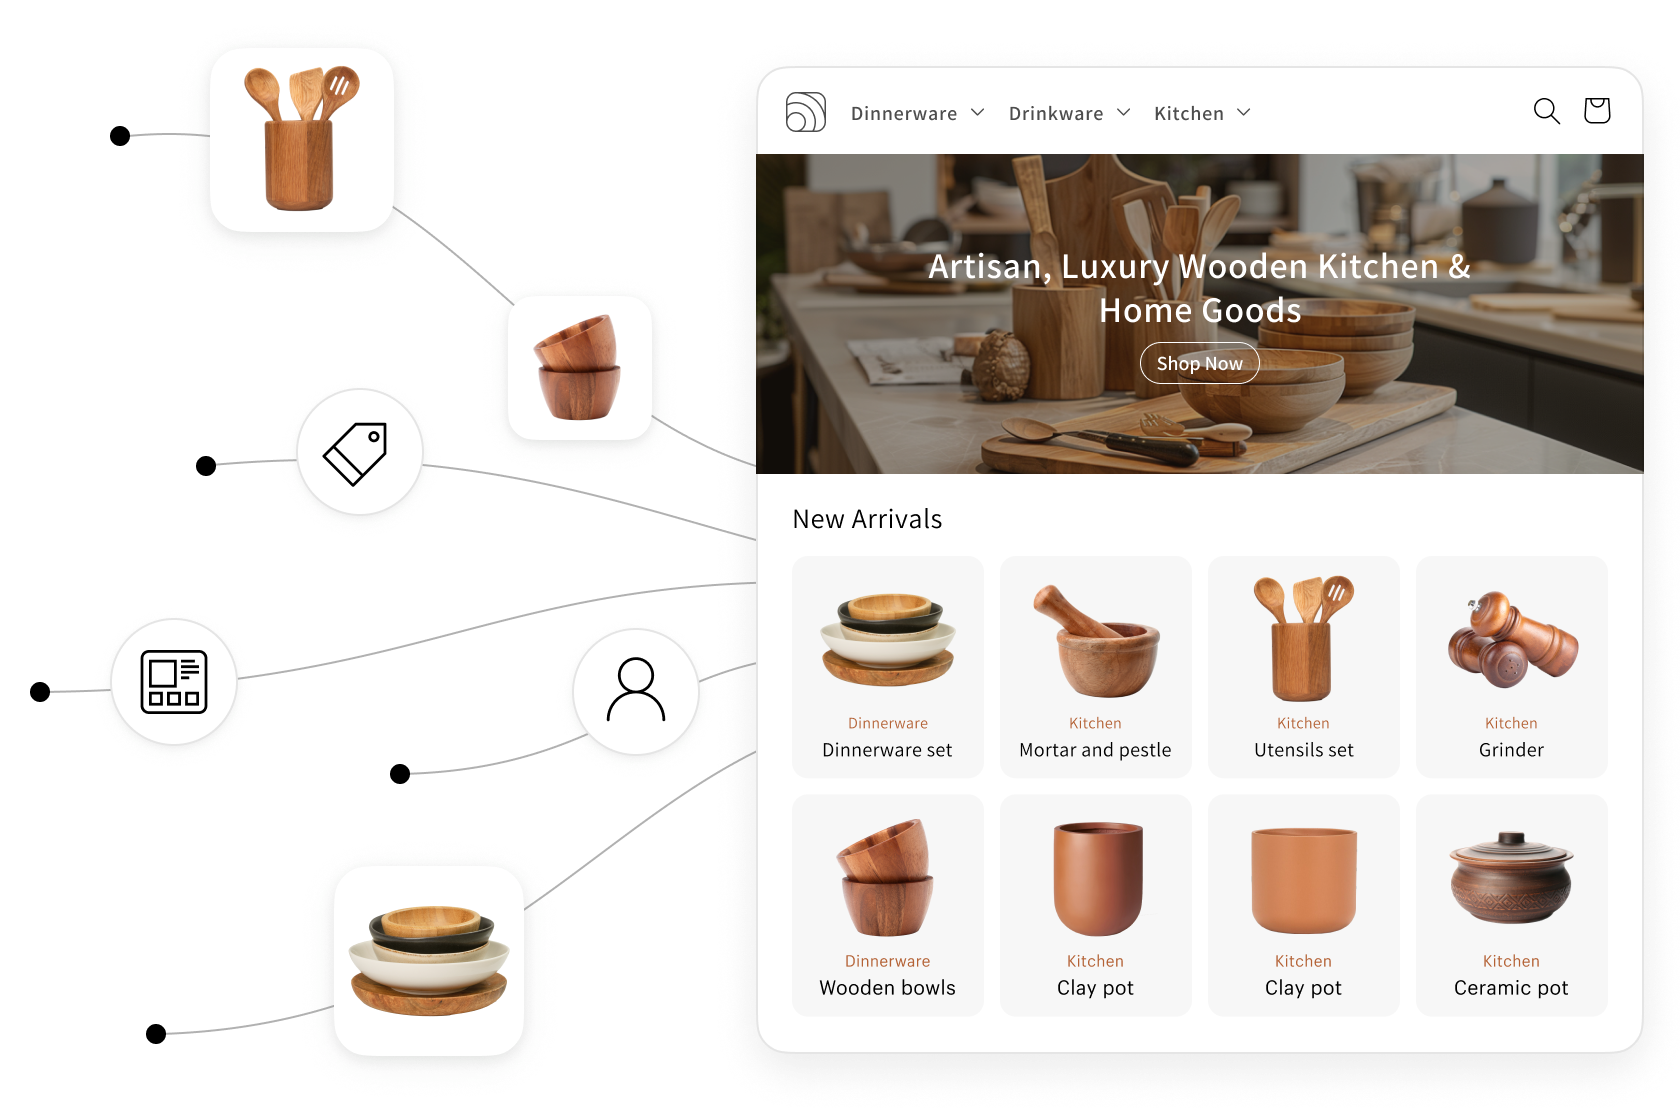 Image collage showing products getting imported into a website for a luxury wooden home goods brand